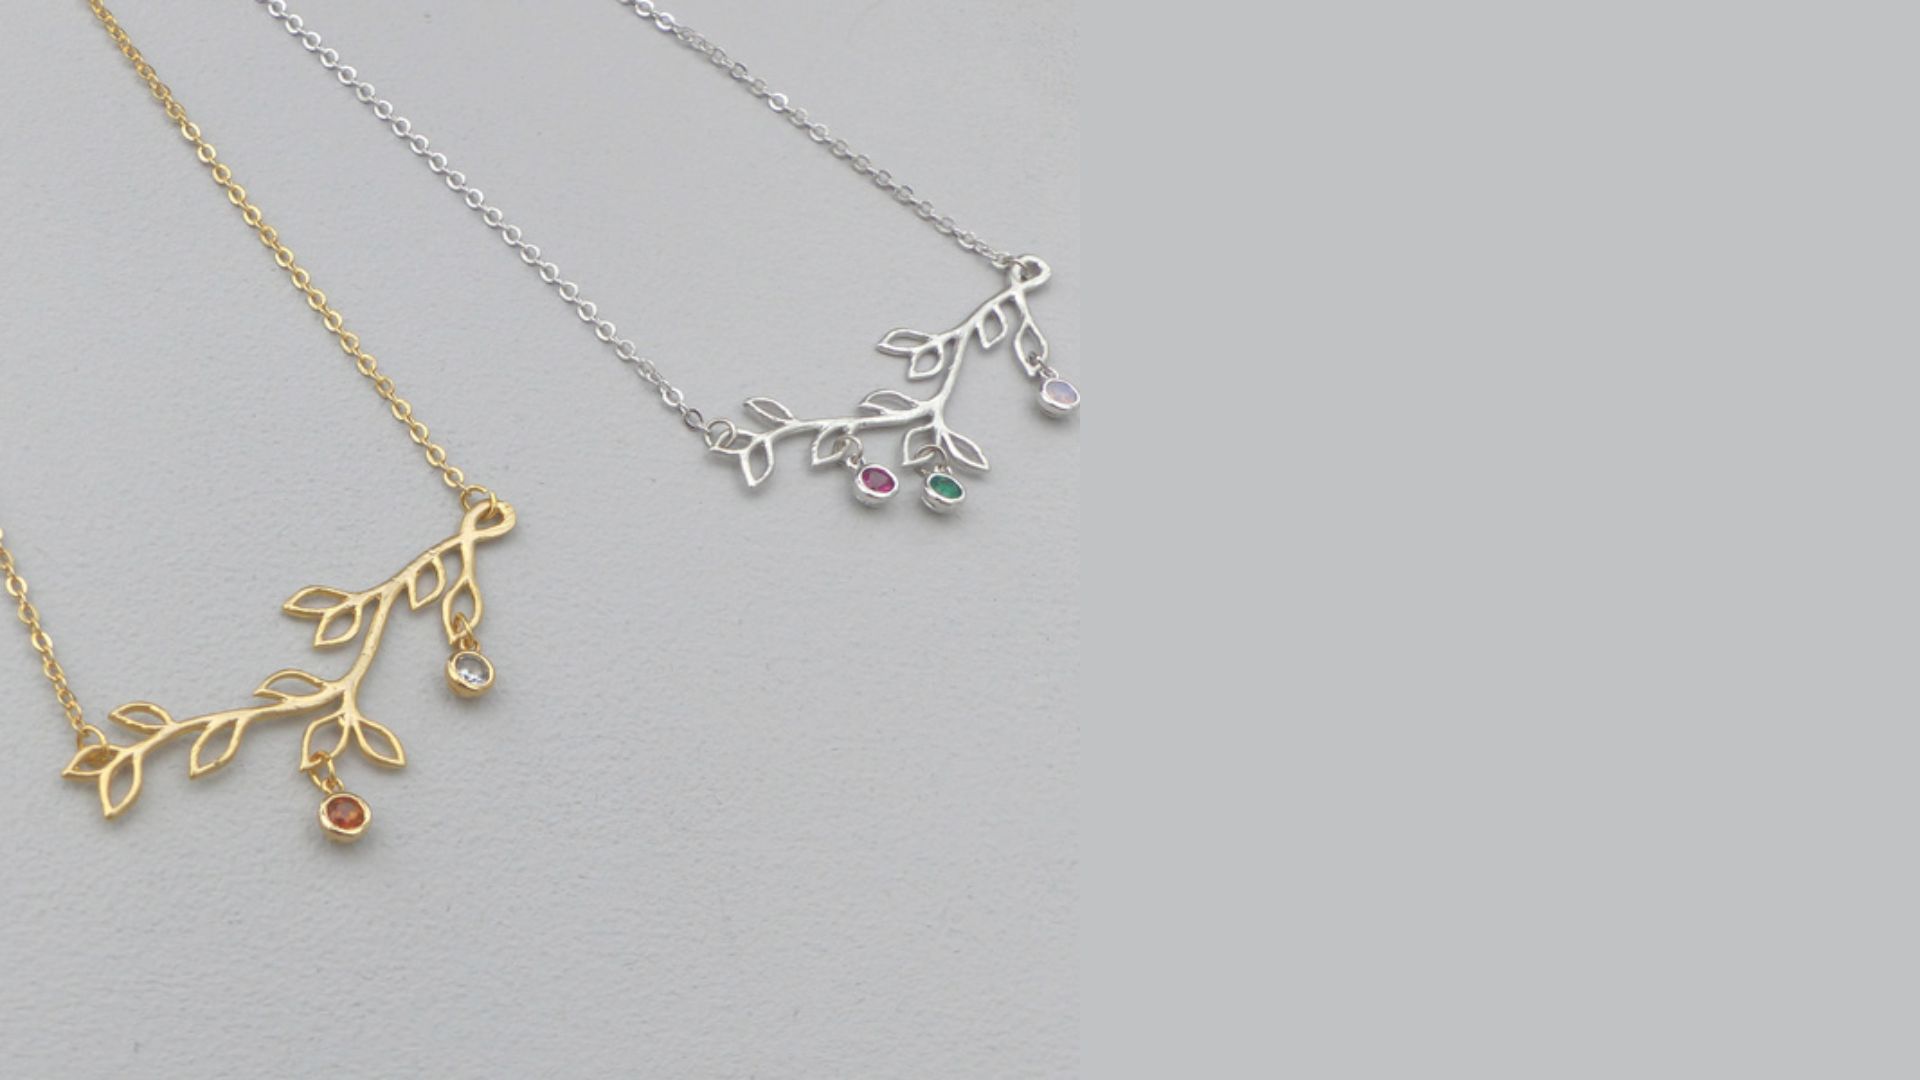 Unique Collection Of Birthstone Jewelry For Grandmothers